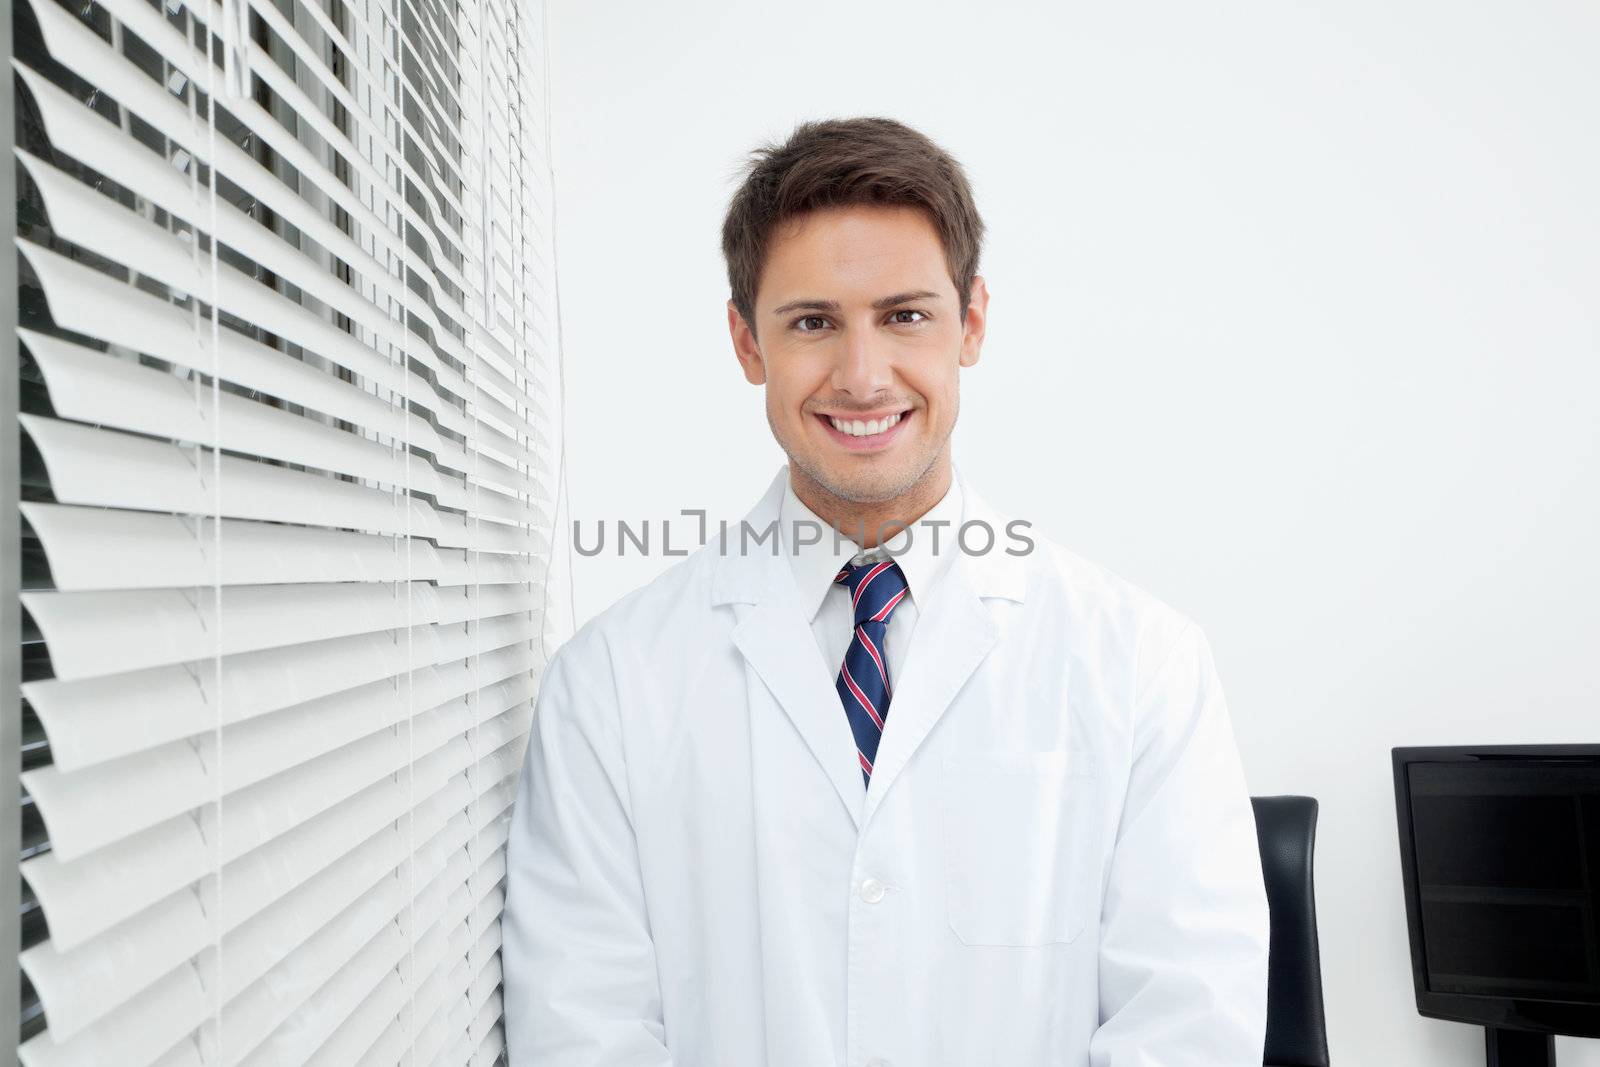 Portrait of happy young male dentist standing in clinic